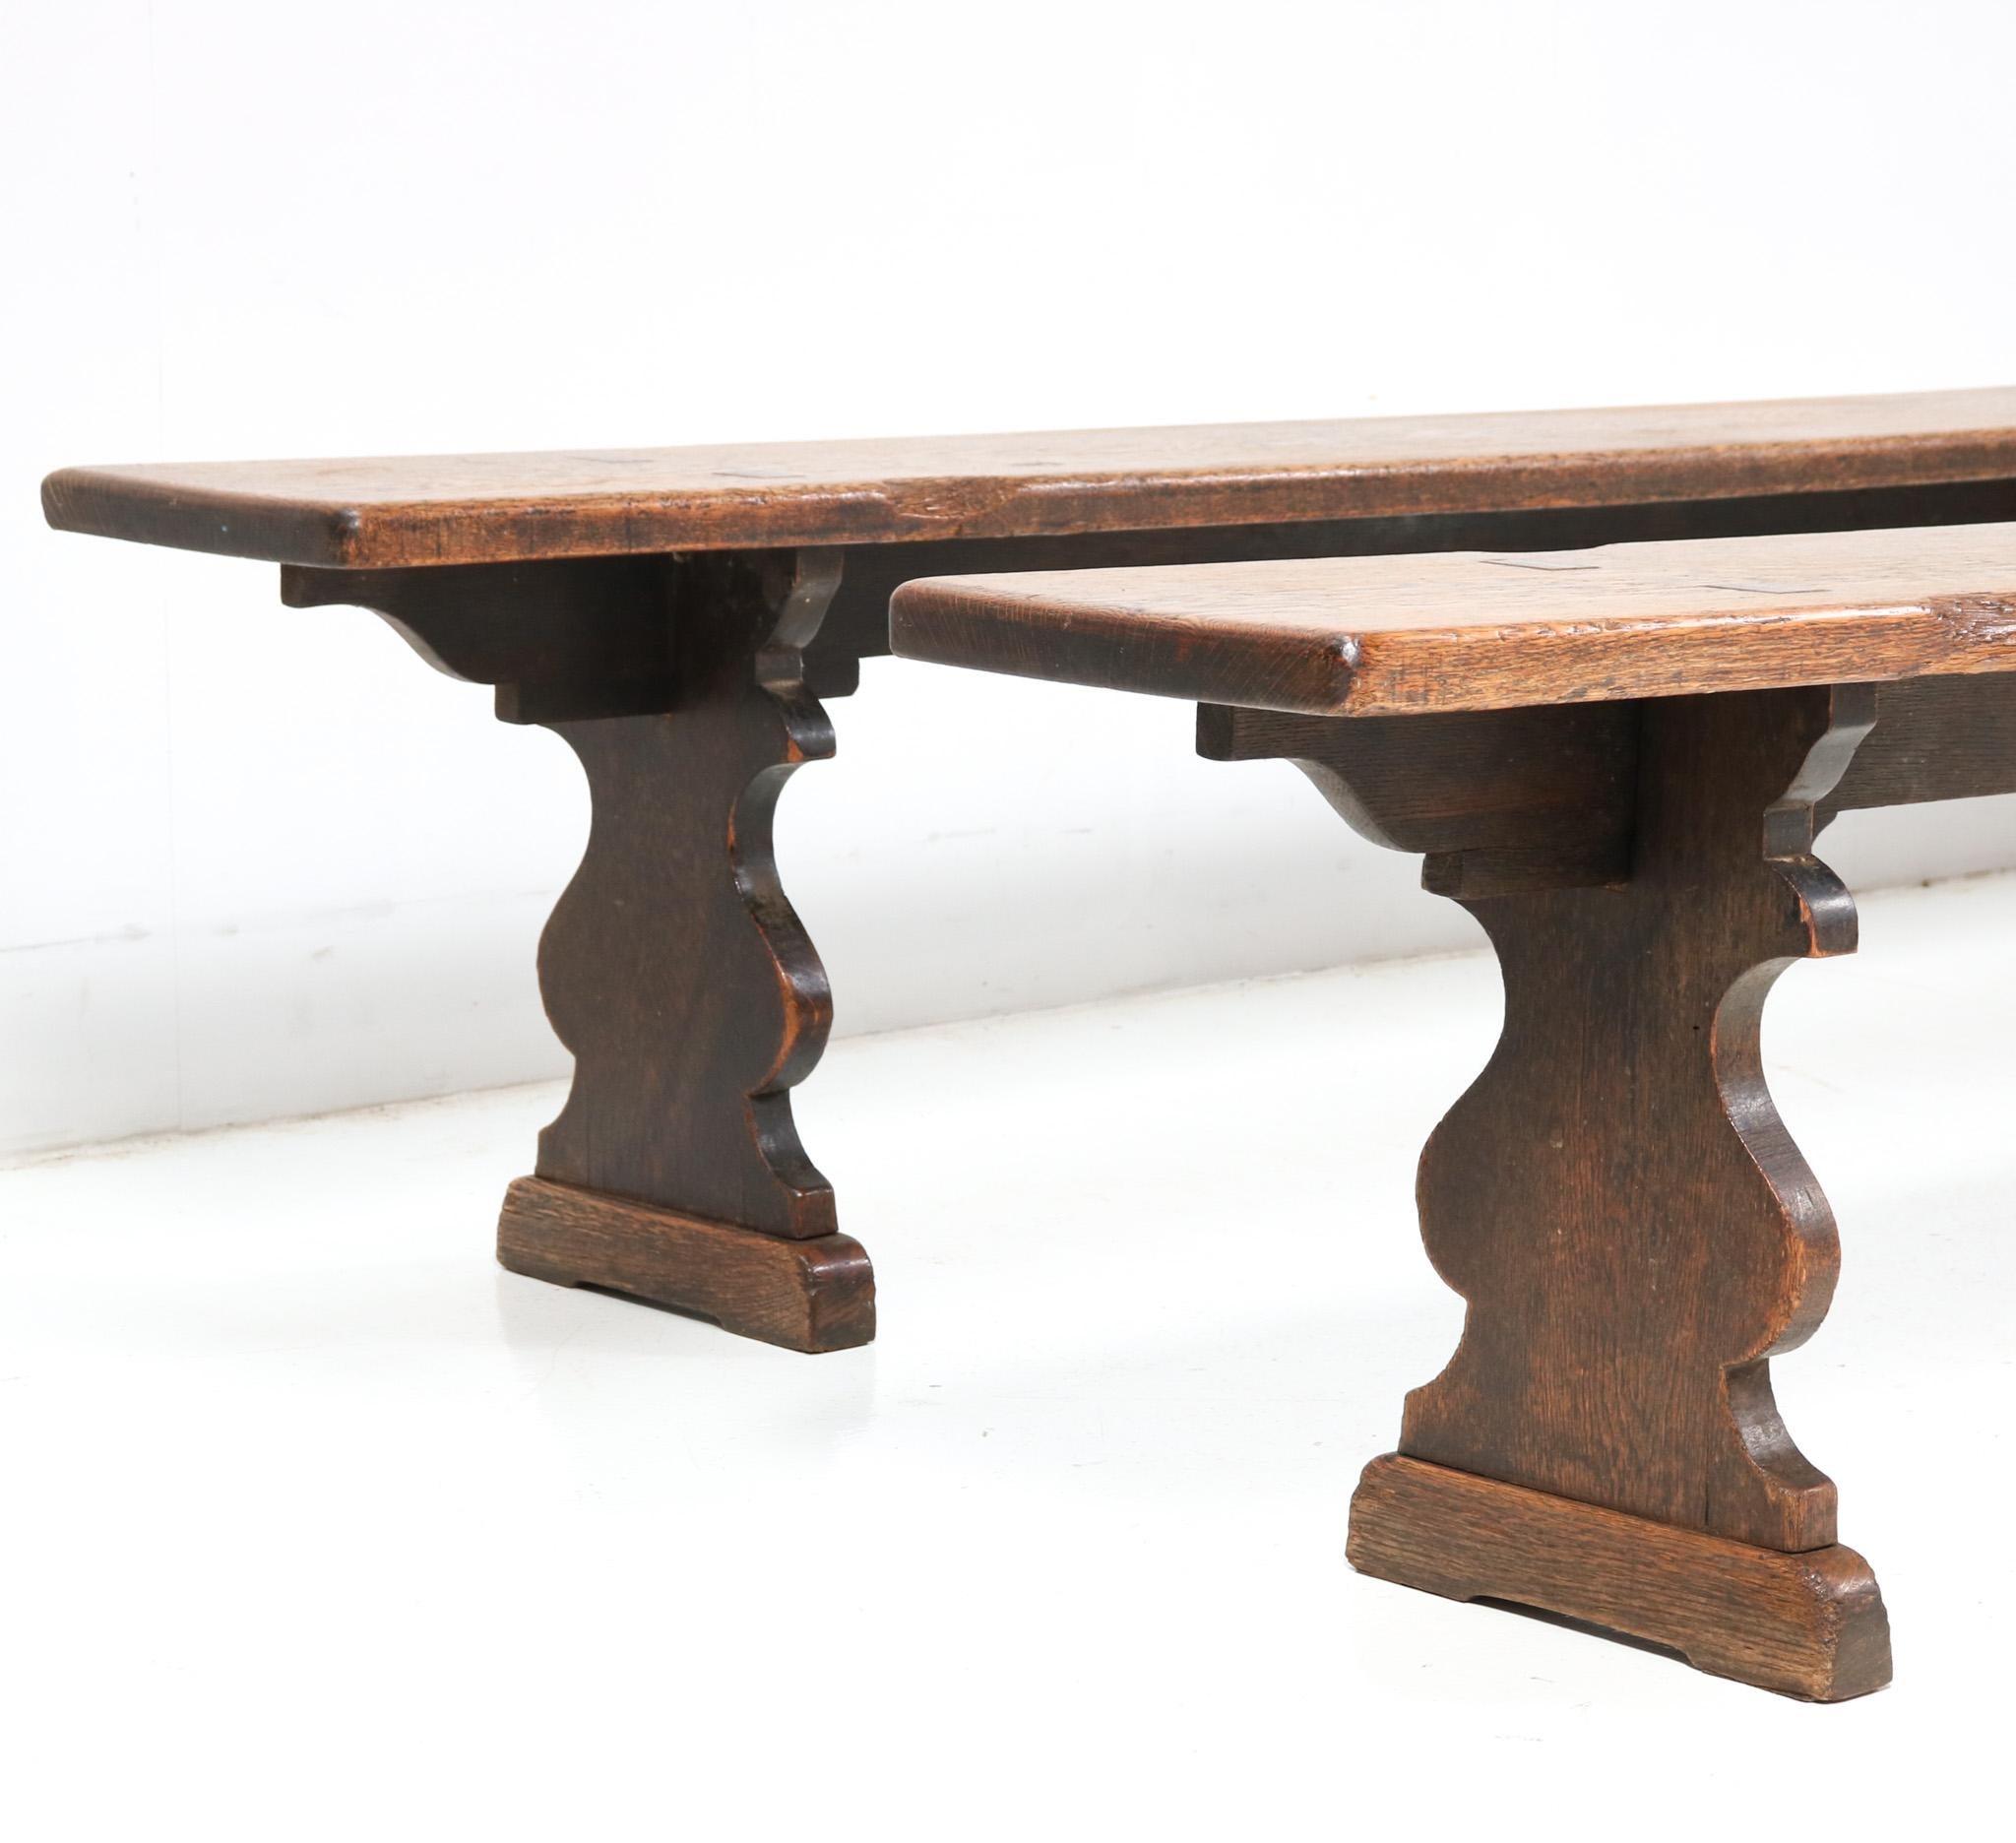 French Provincial Large Oak Farm Table with Two Matching Benches, 1900s For Sale 2